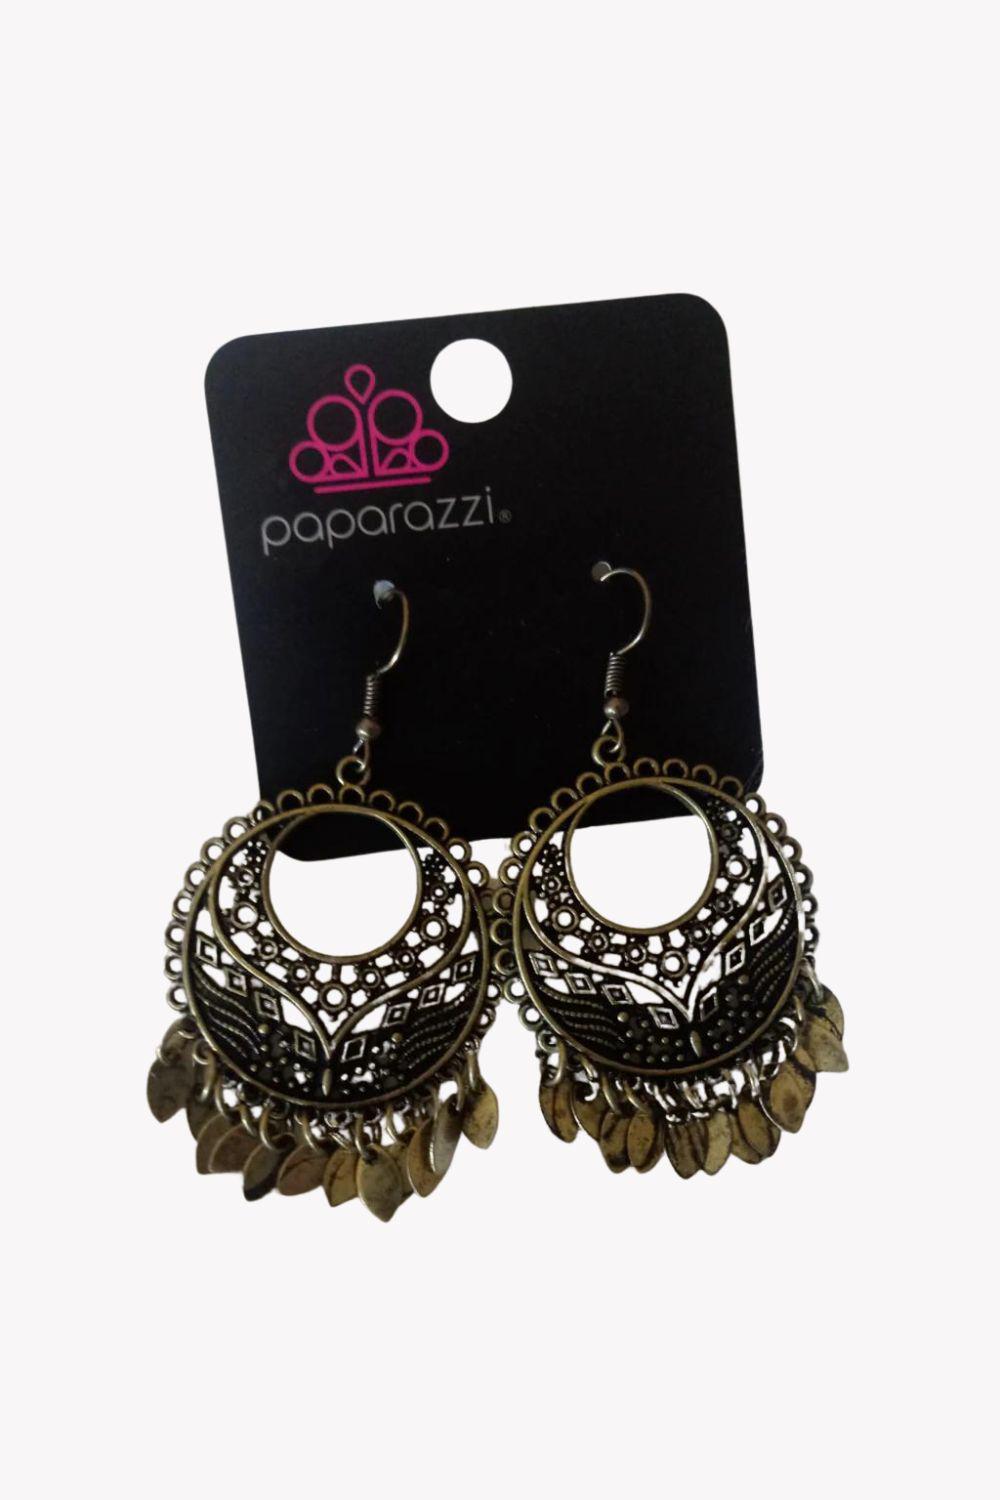 Far Off Horizons Brass Earrings - Paparazzi Accessories- lightbox - CarasShop.com - $5 Jewelry by Cara Jewels